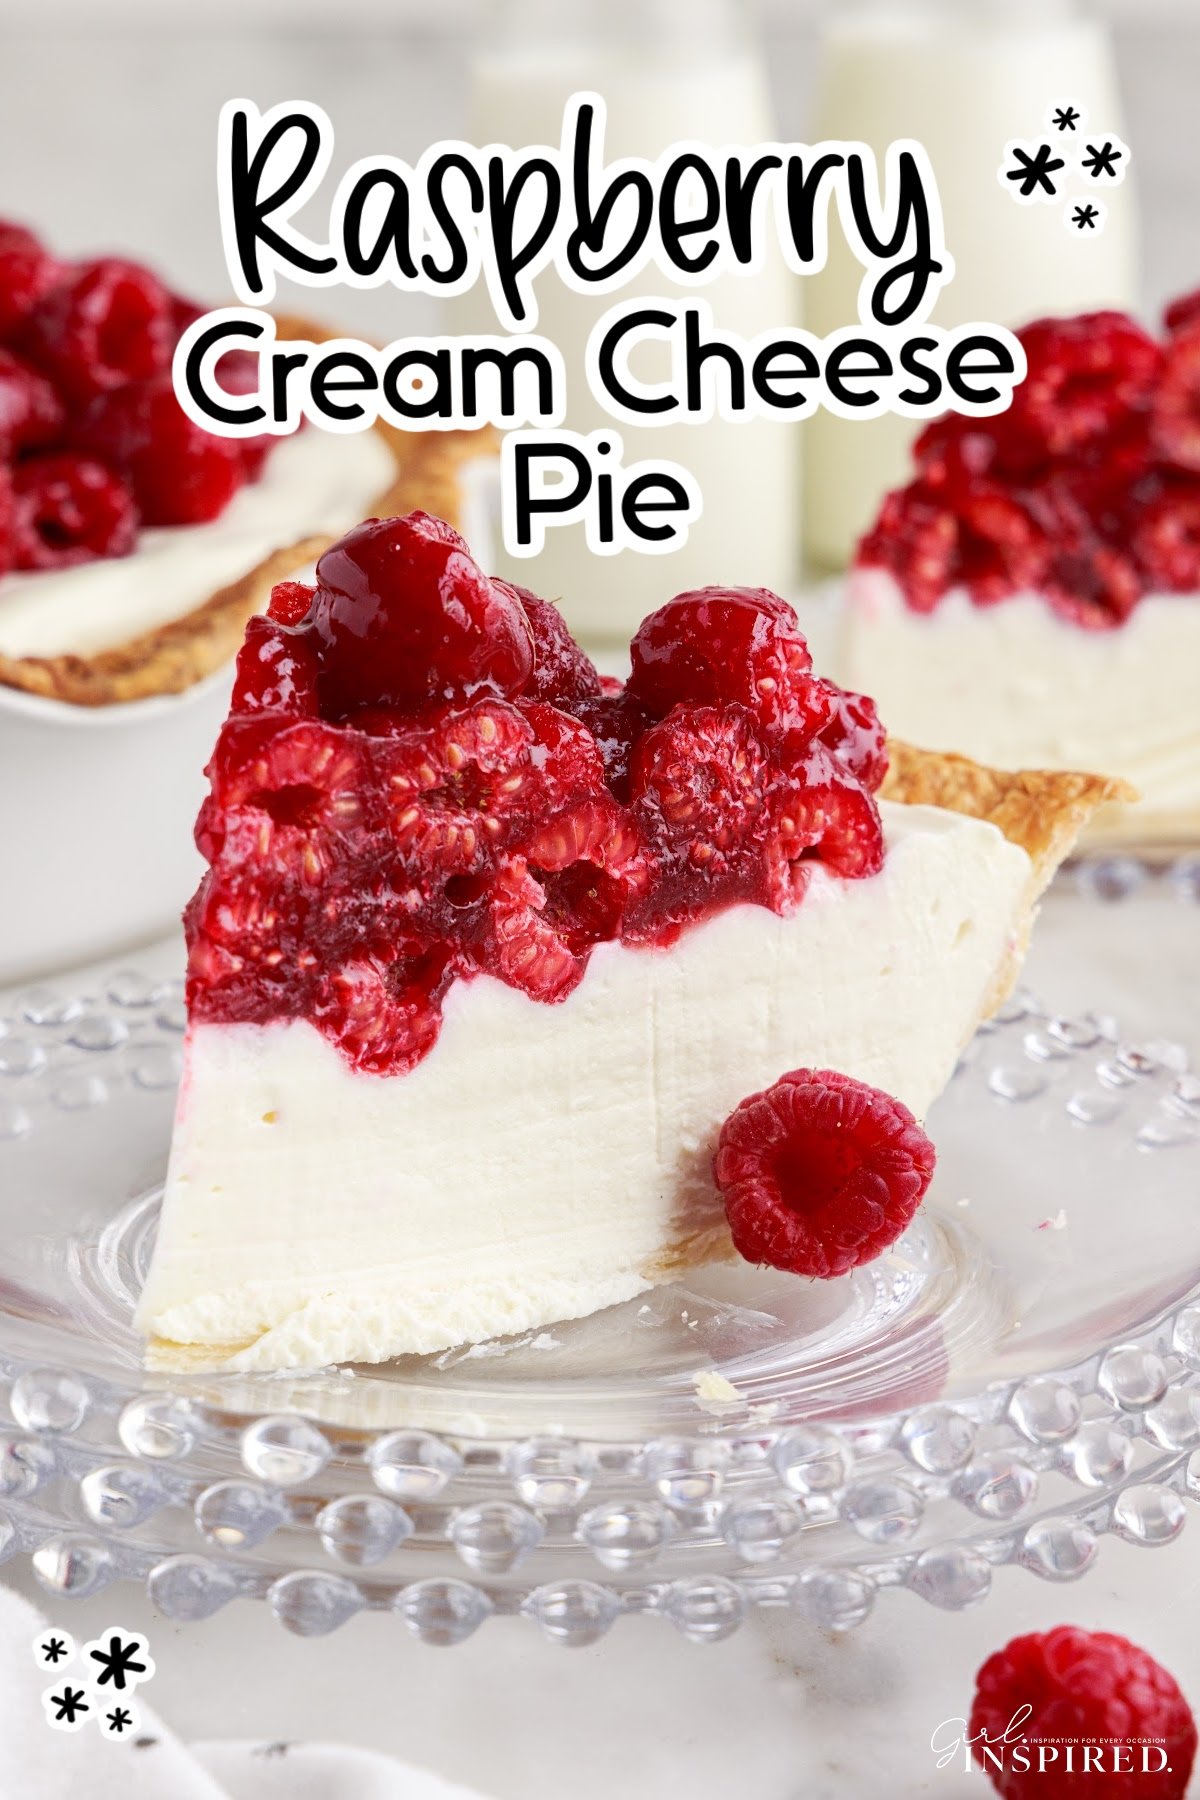 A slice of Raspberry Cream Cheese Pie on a plate with berries on top and text overlay.